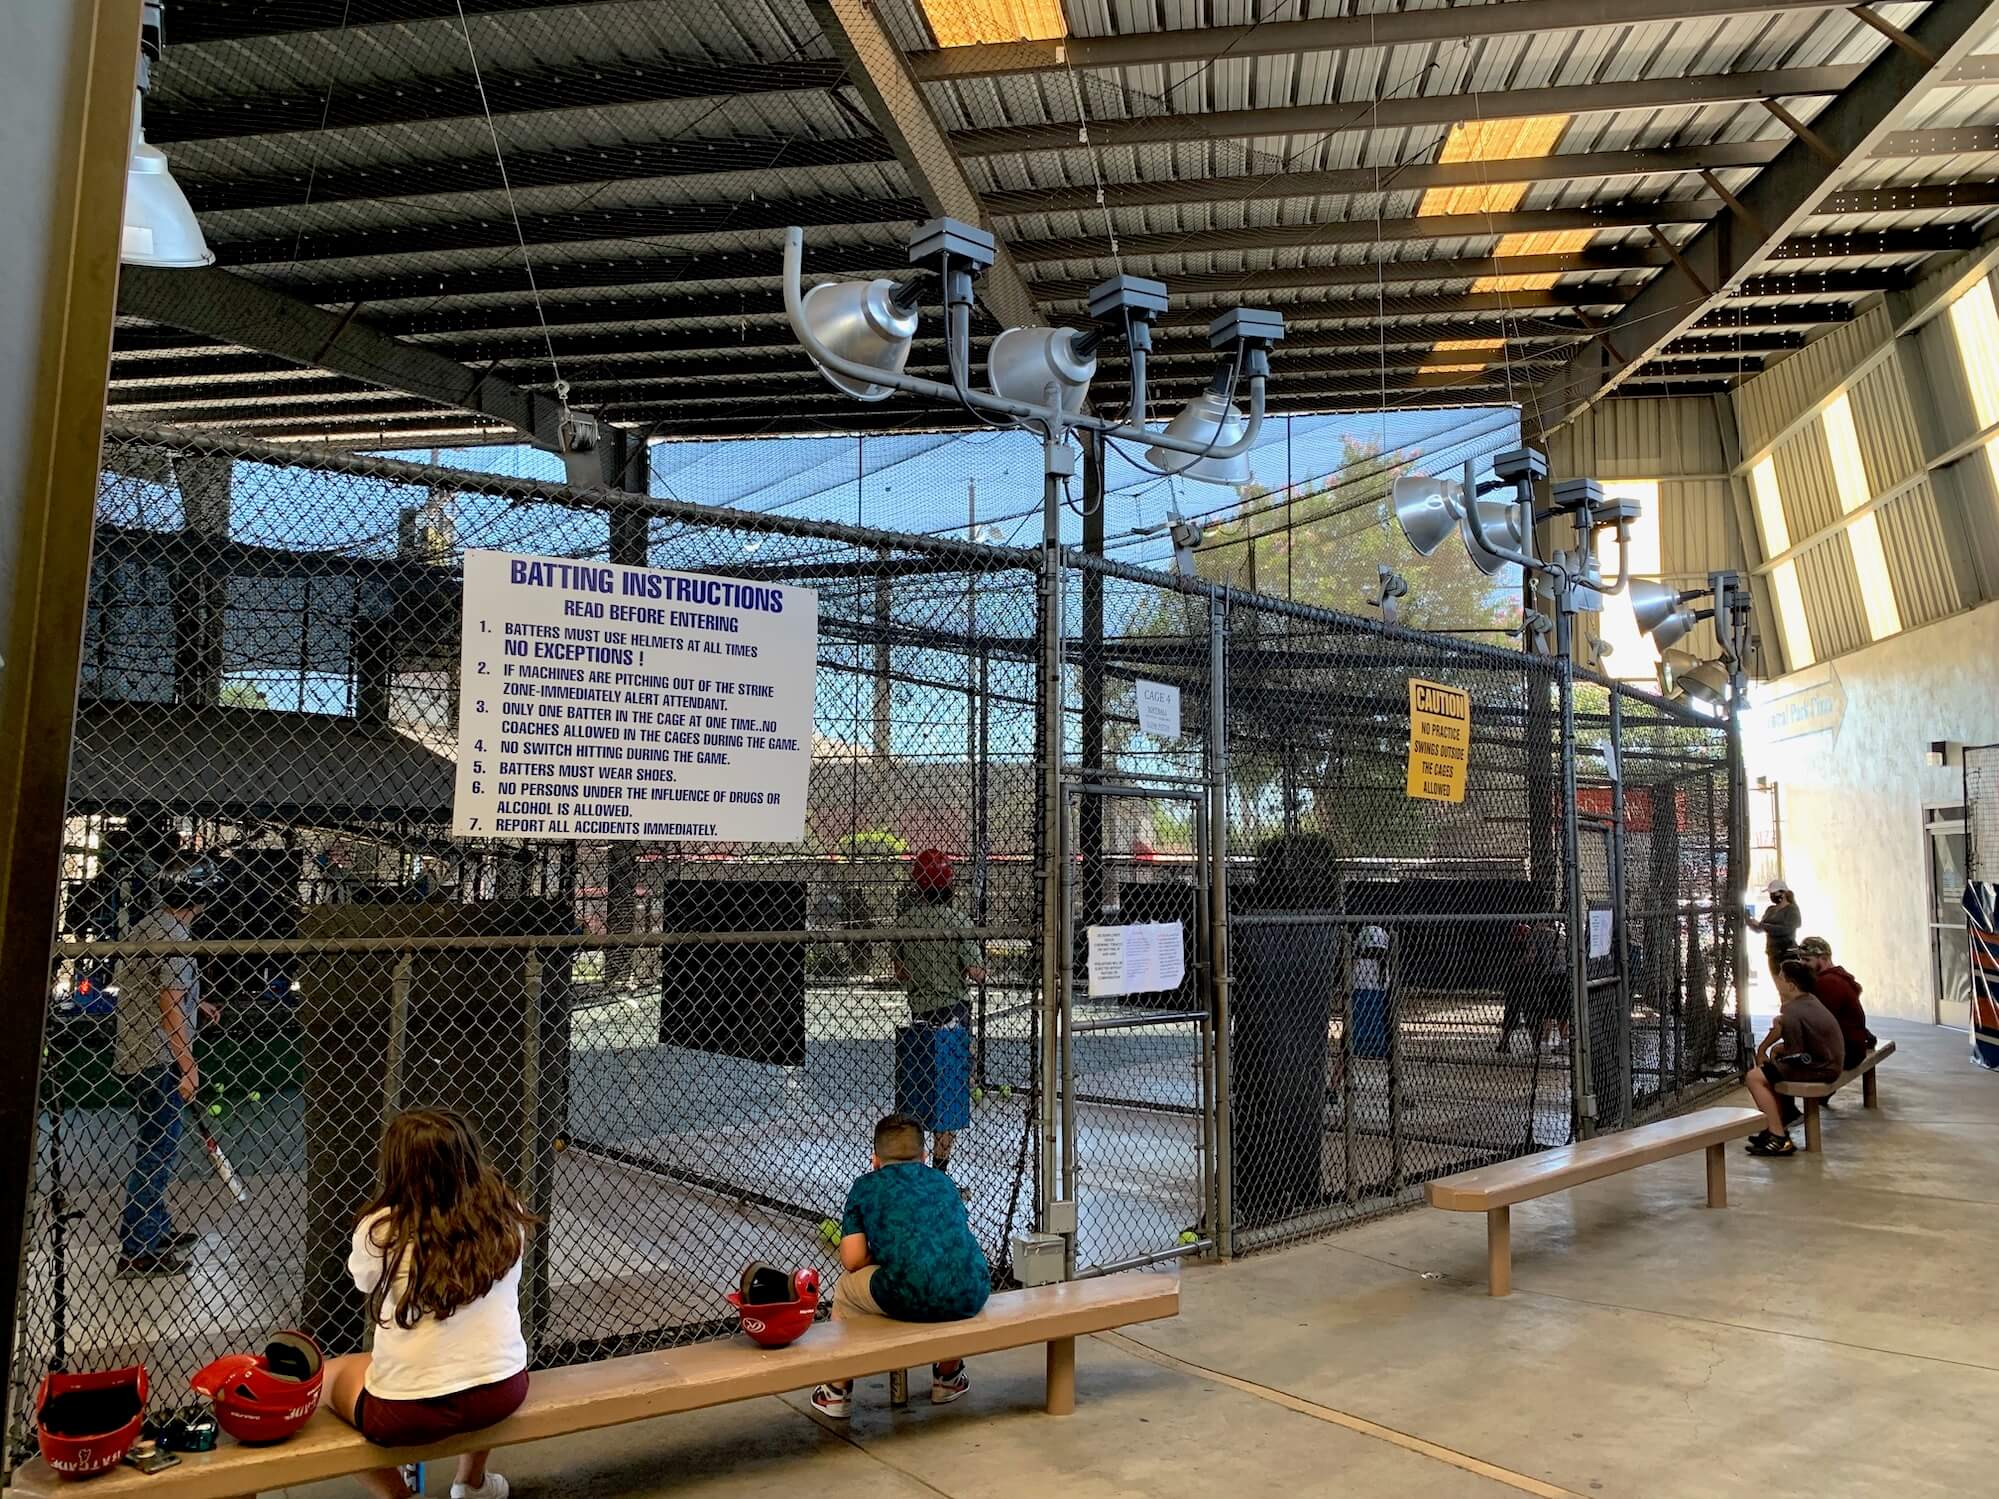 Batting cages in use at BatCade